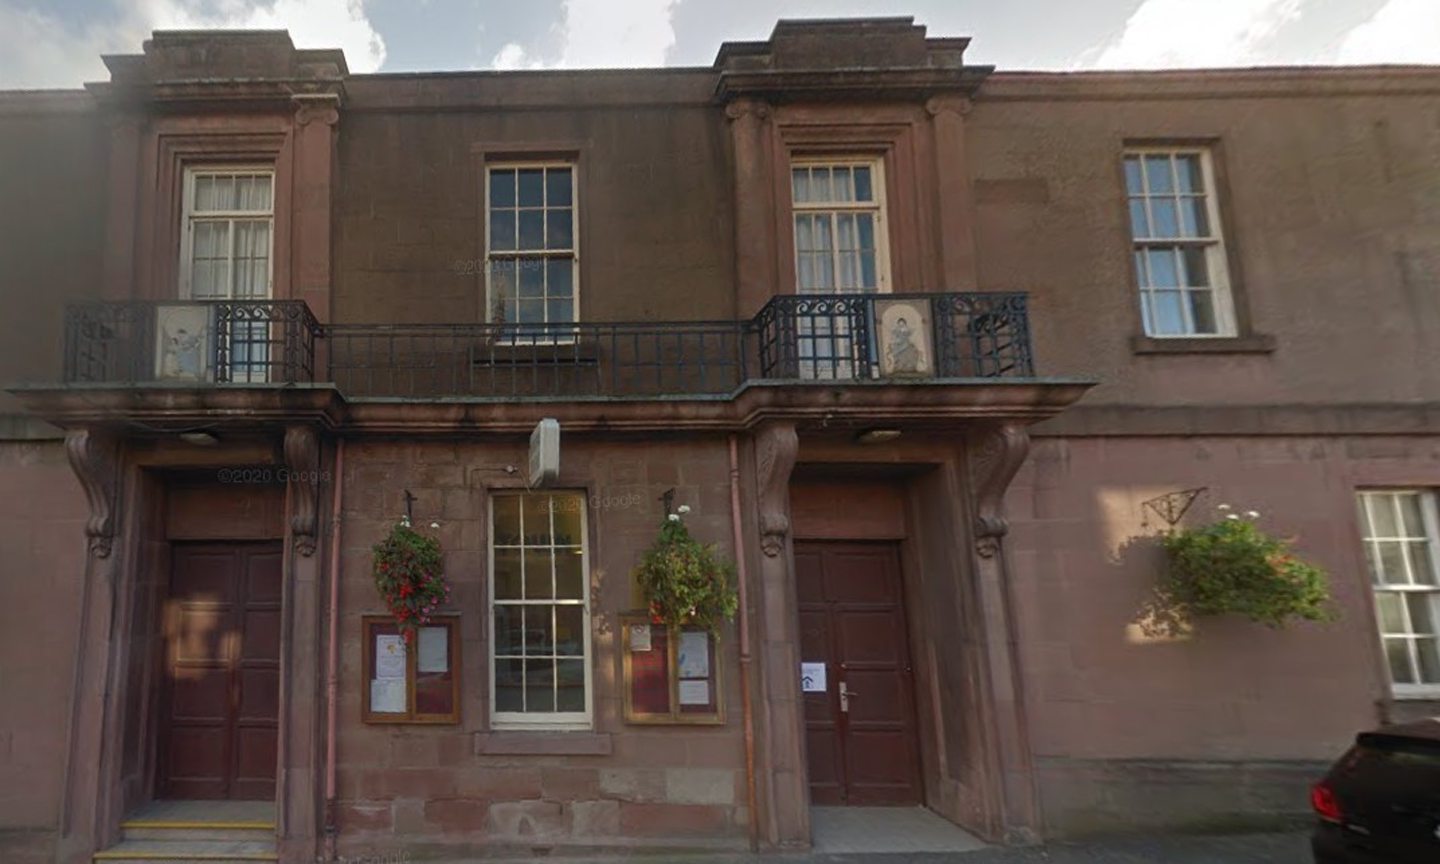 Holiday let allowed despite fears of 'uncaring' guests near Blairgowrie Town Hall